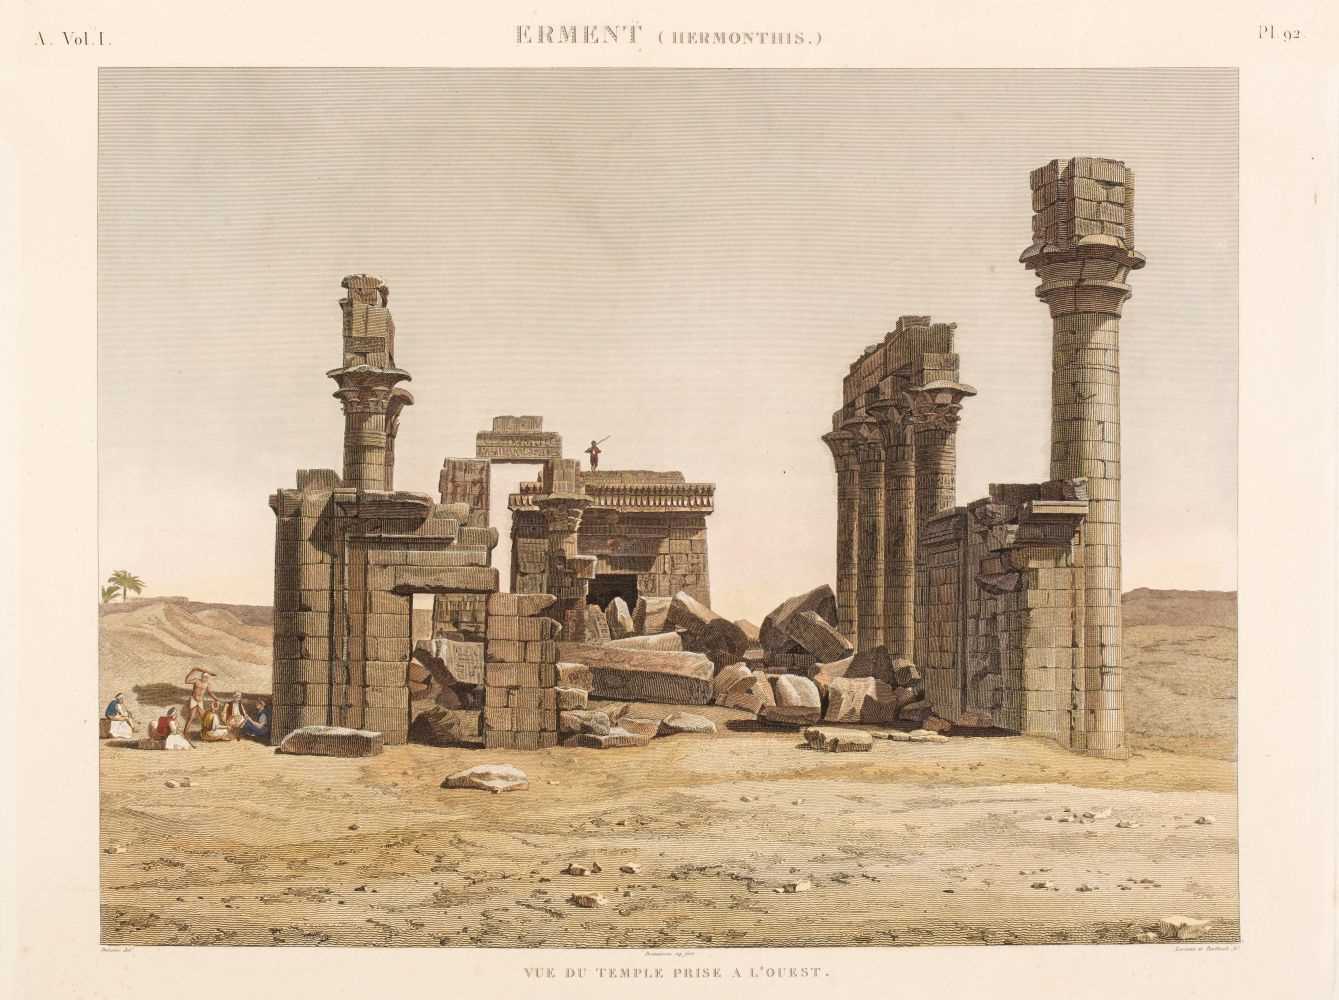 Lot 7 - Egypt. 10 engraved views on 8 sheets from